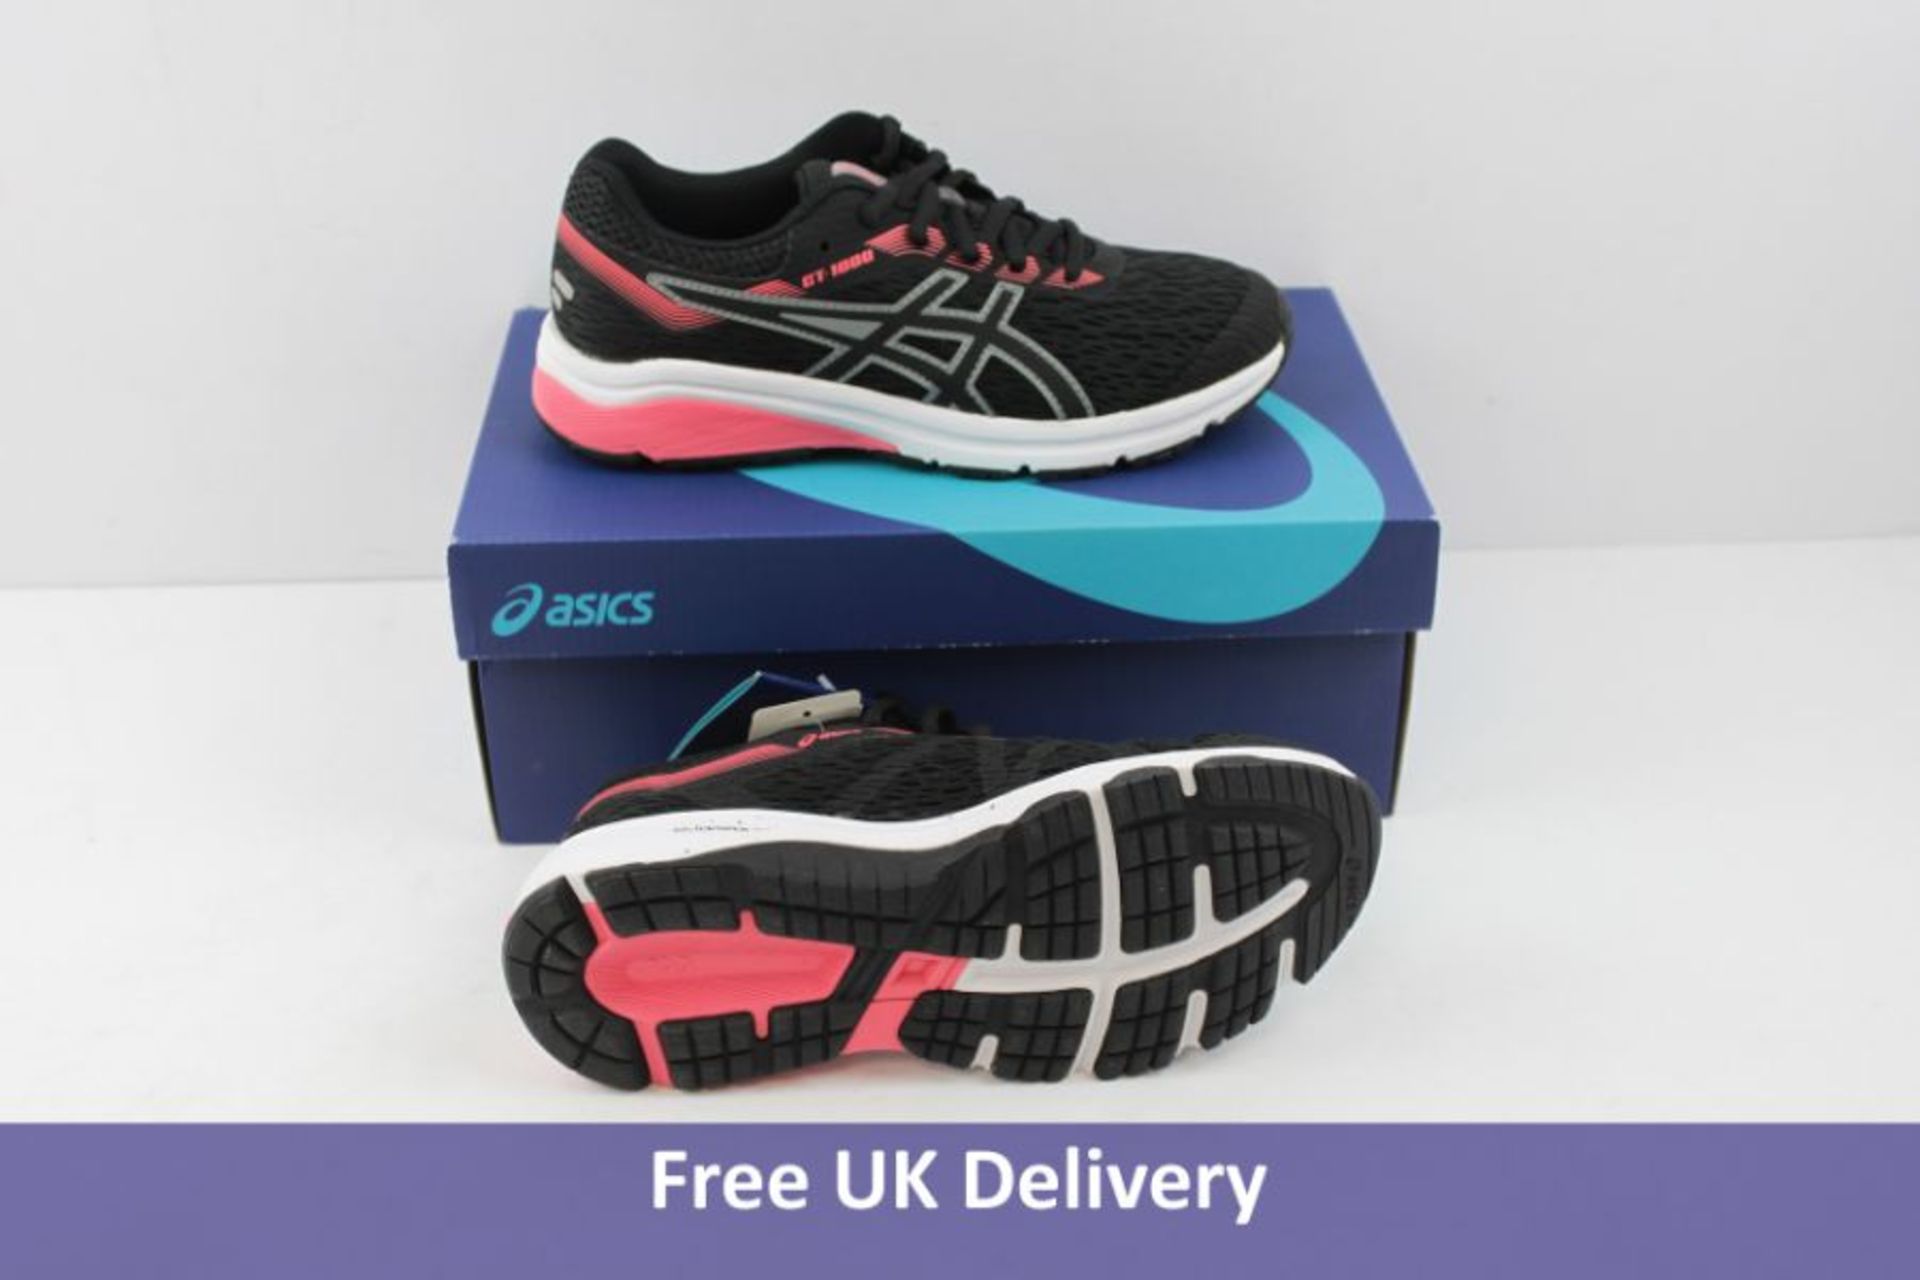 Asics Girl's GT-1000 7 Running Shoes, Black and Pink, UK 4